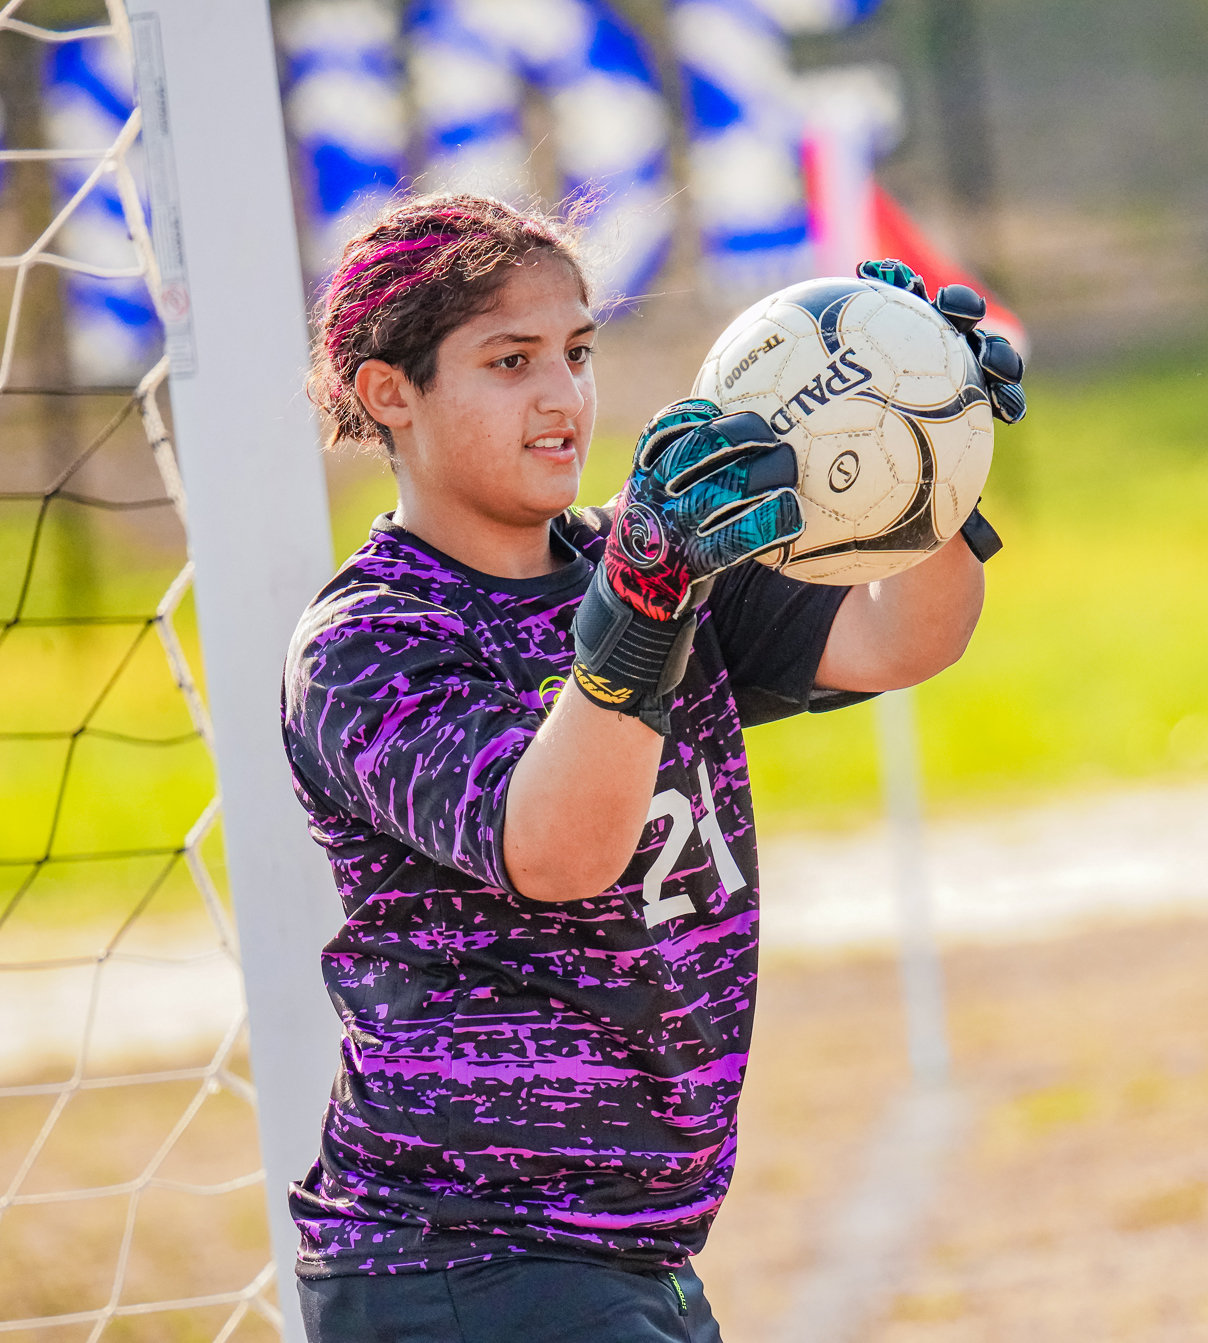 Sophomore goalkeeper Jennah Farooki made 11 saves Sept. 23 as the Jets avenged a season-opening defeat to Hicksville with a 1-0 win.